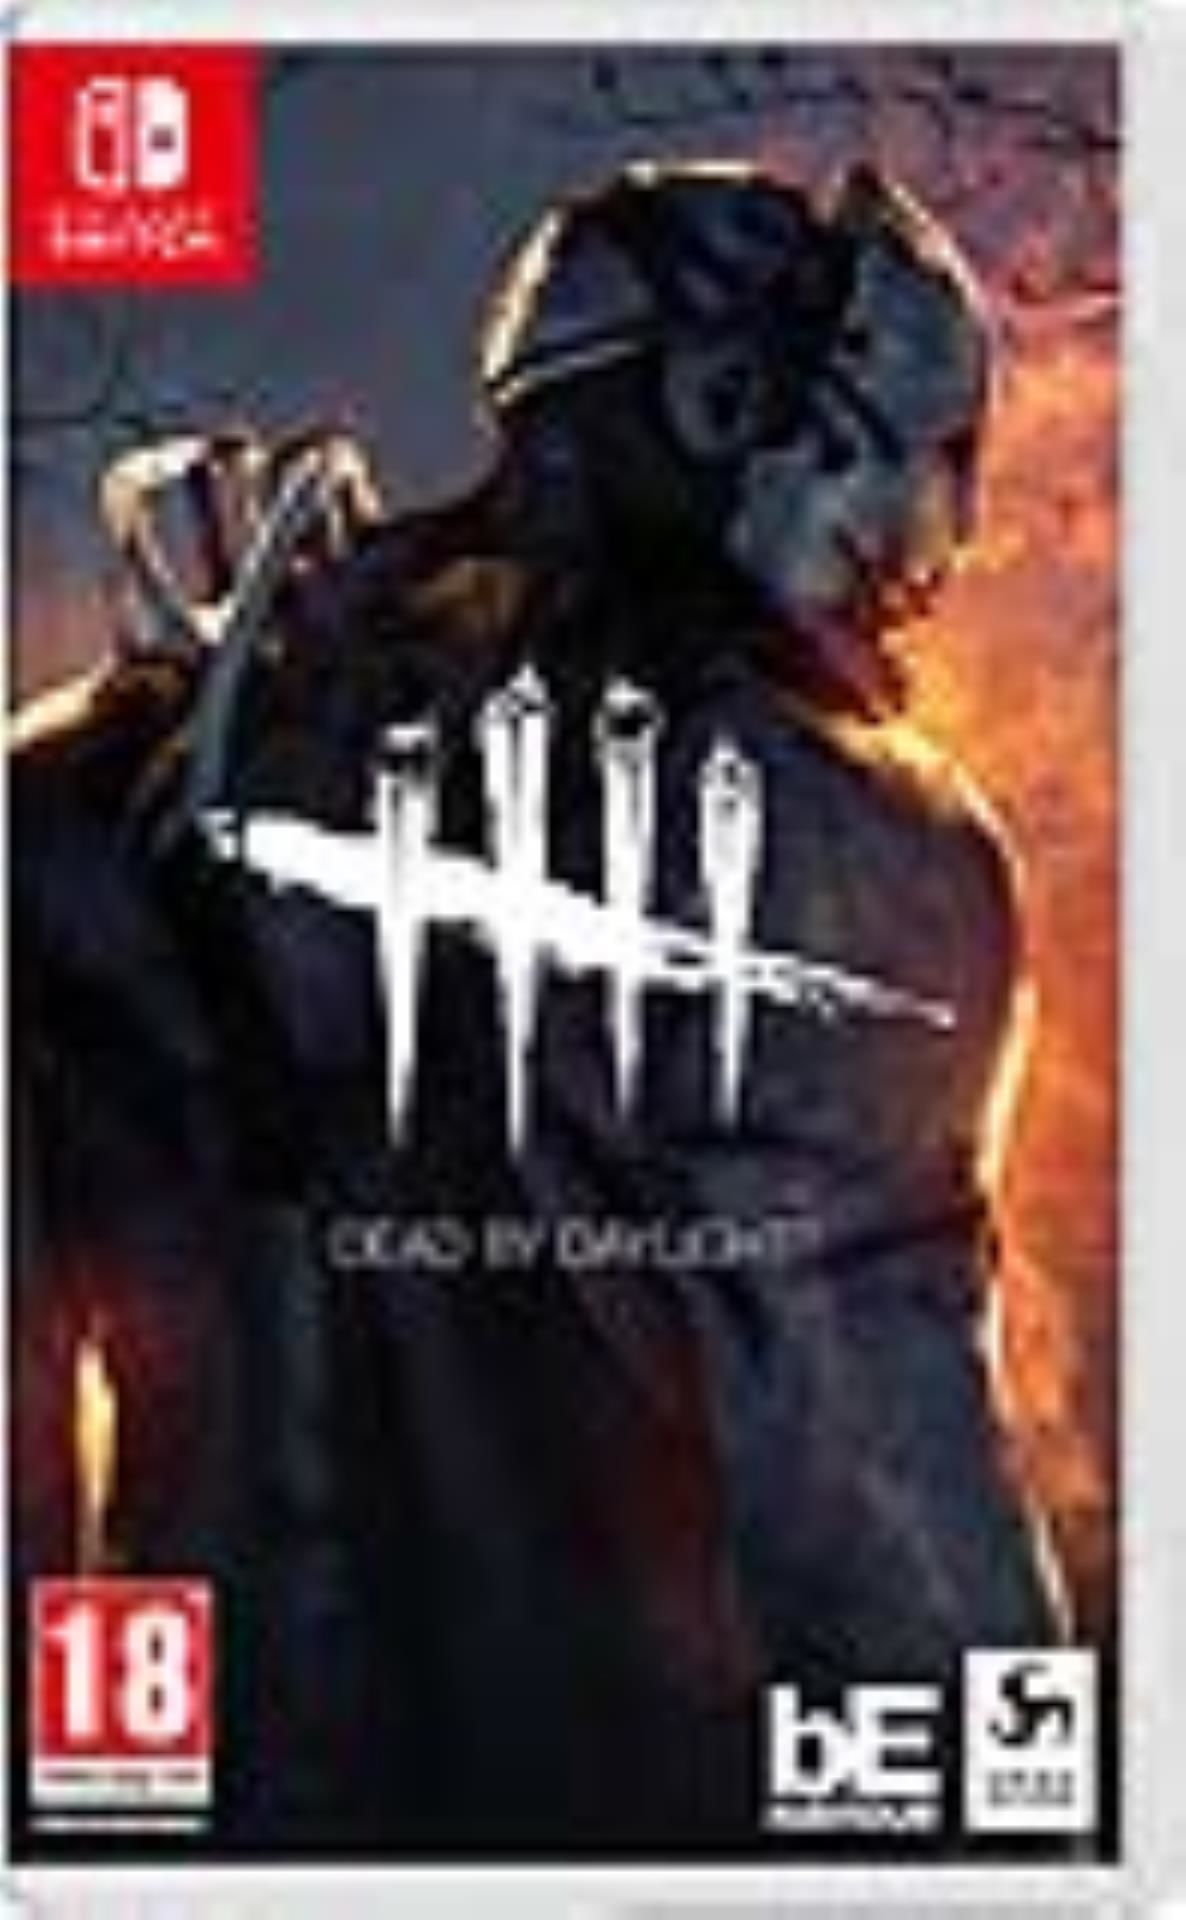 Dead by Daylight Definitive Edition